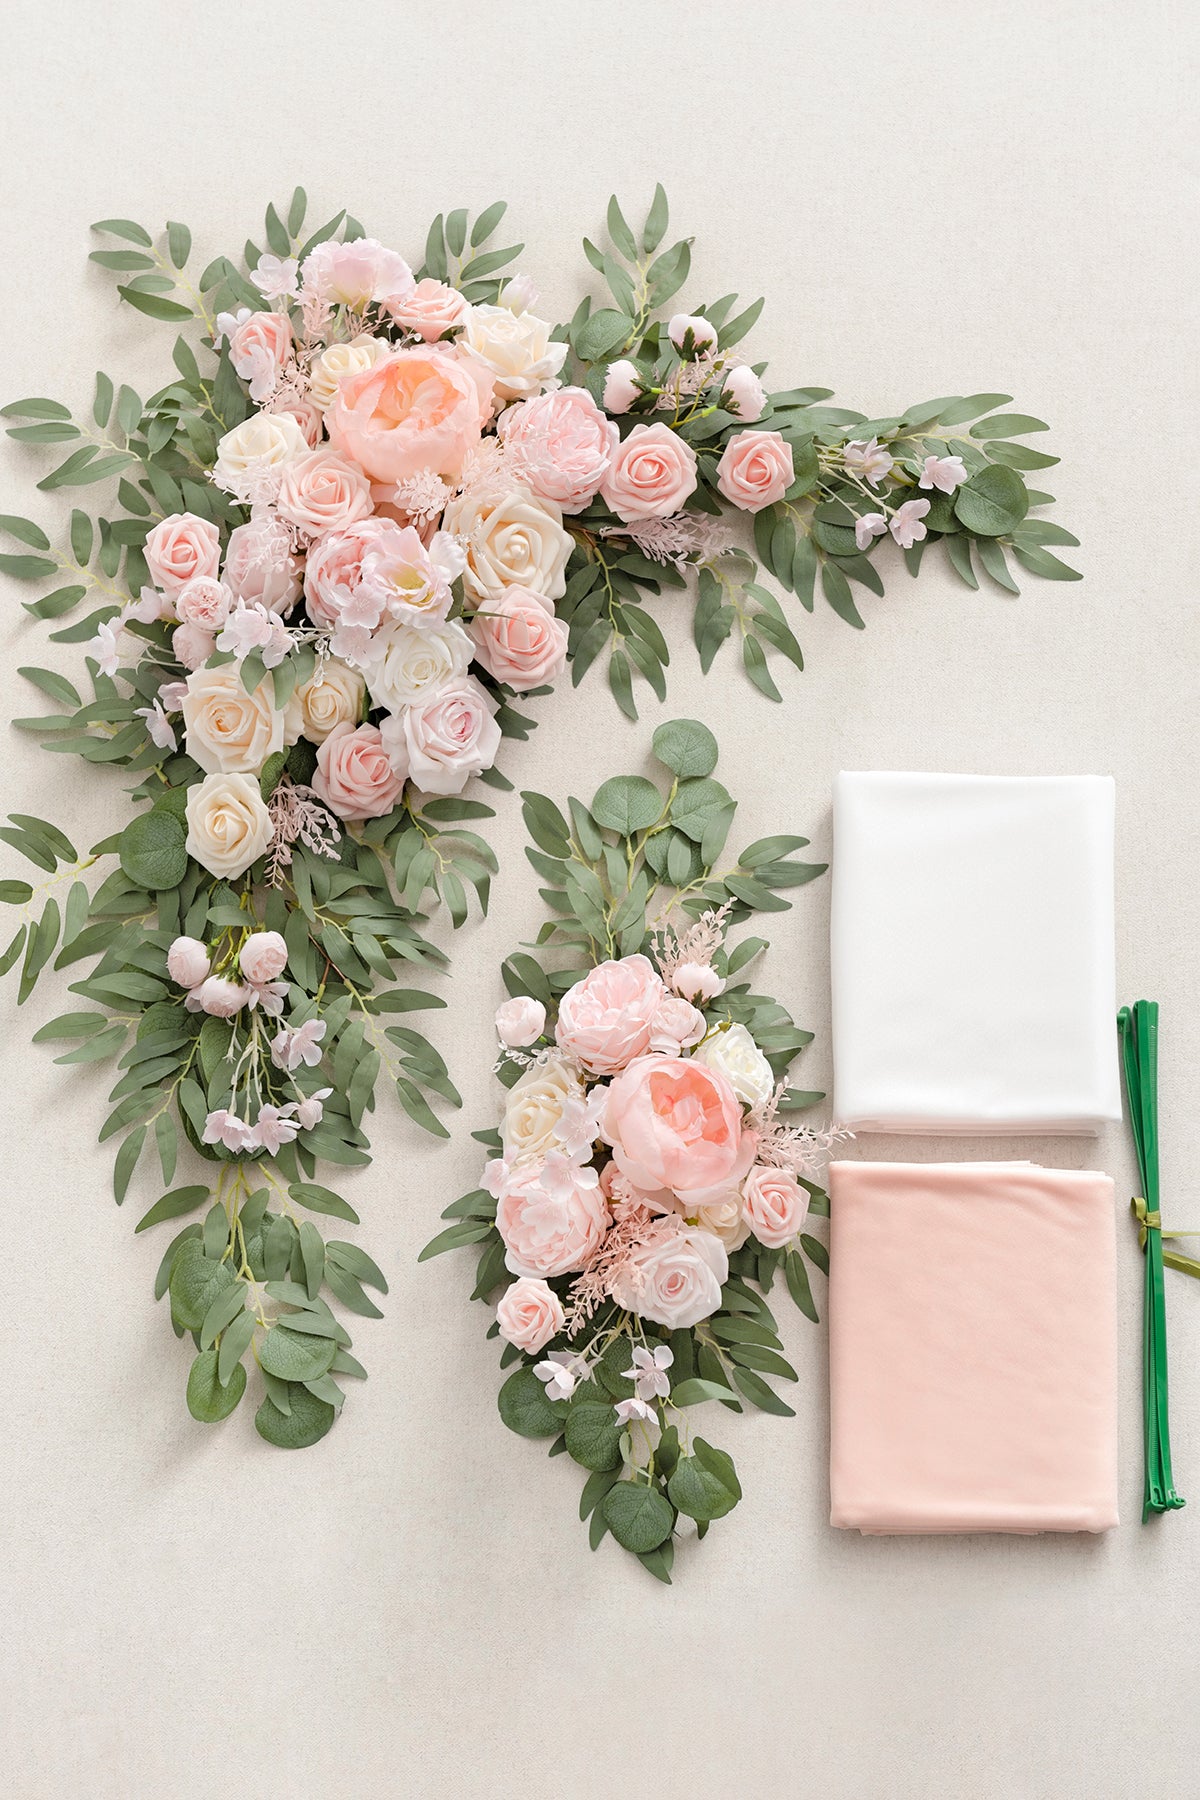 Flower Arch Decor with Drapes in Blush & Cream | Clearance